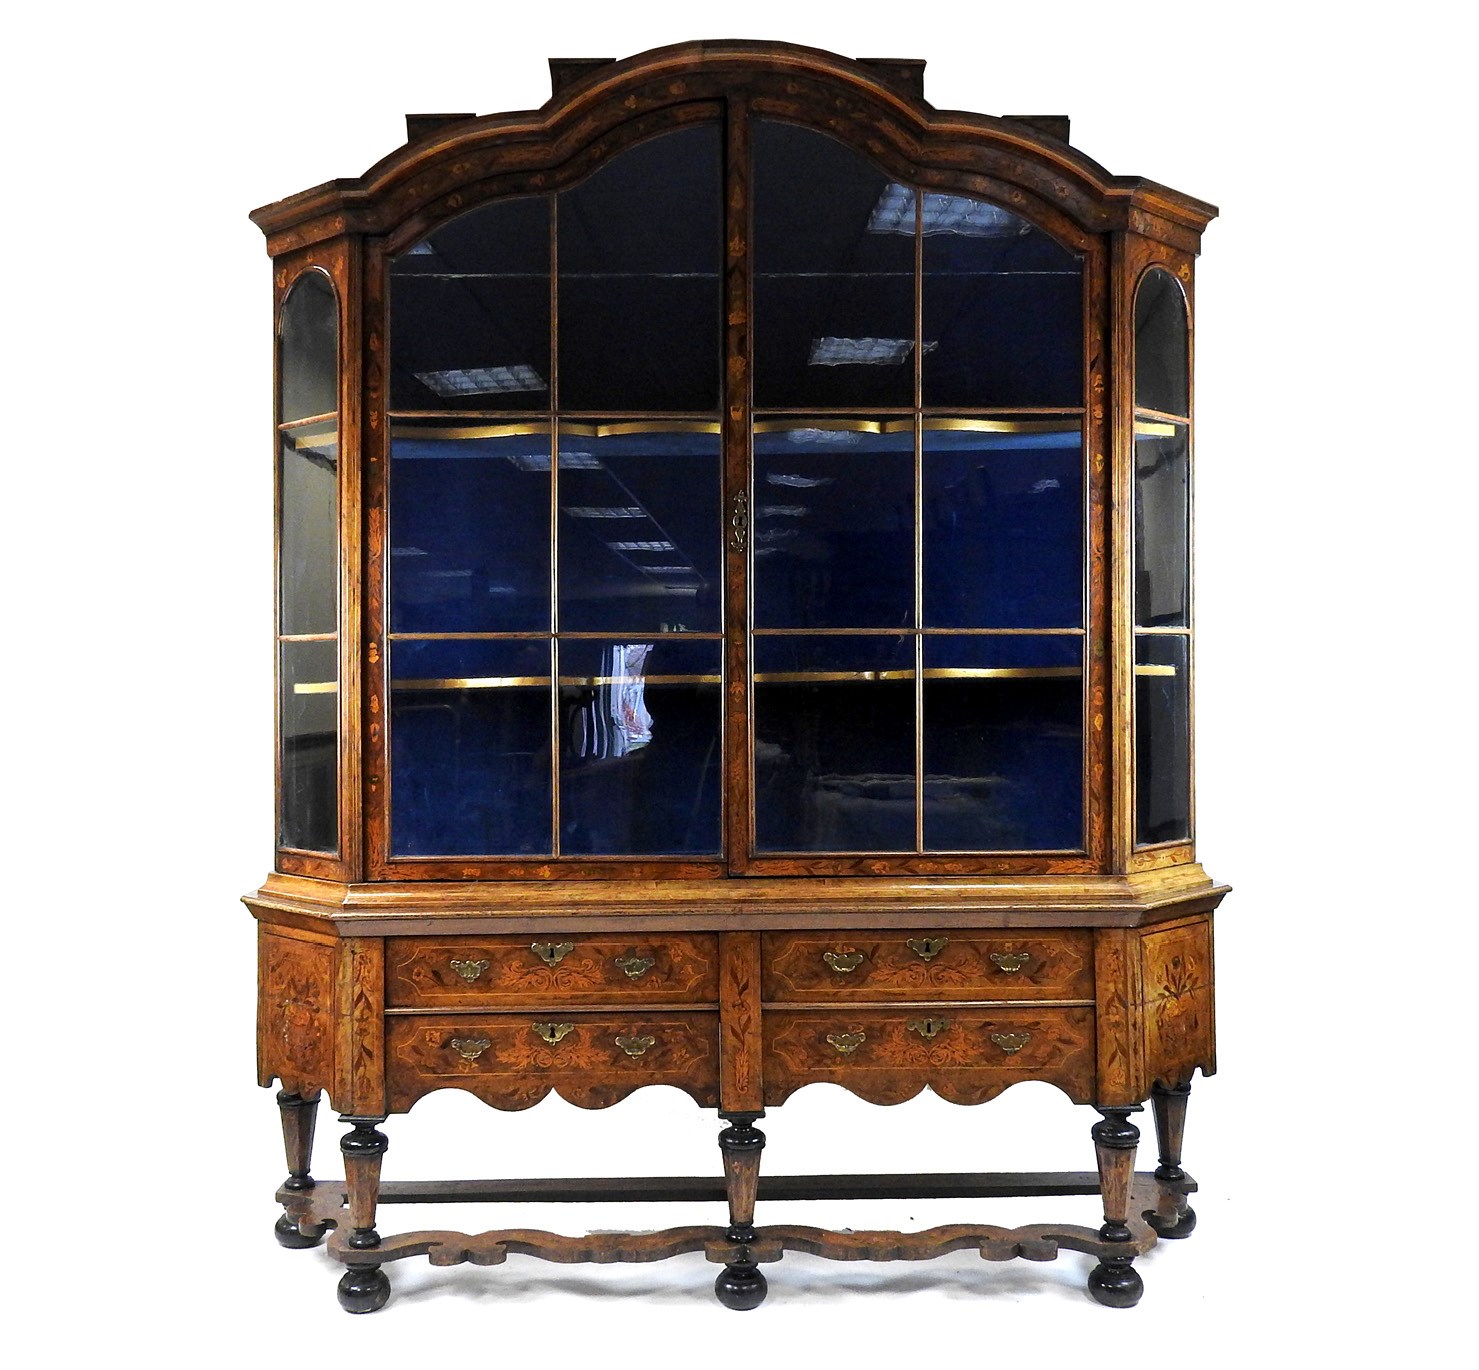 Lot 111, A Dutch walnut and floral marquetry inlaid display cabinet, 18th century